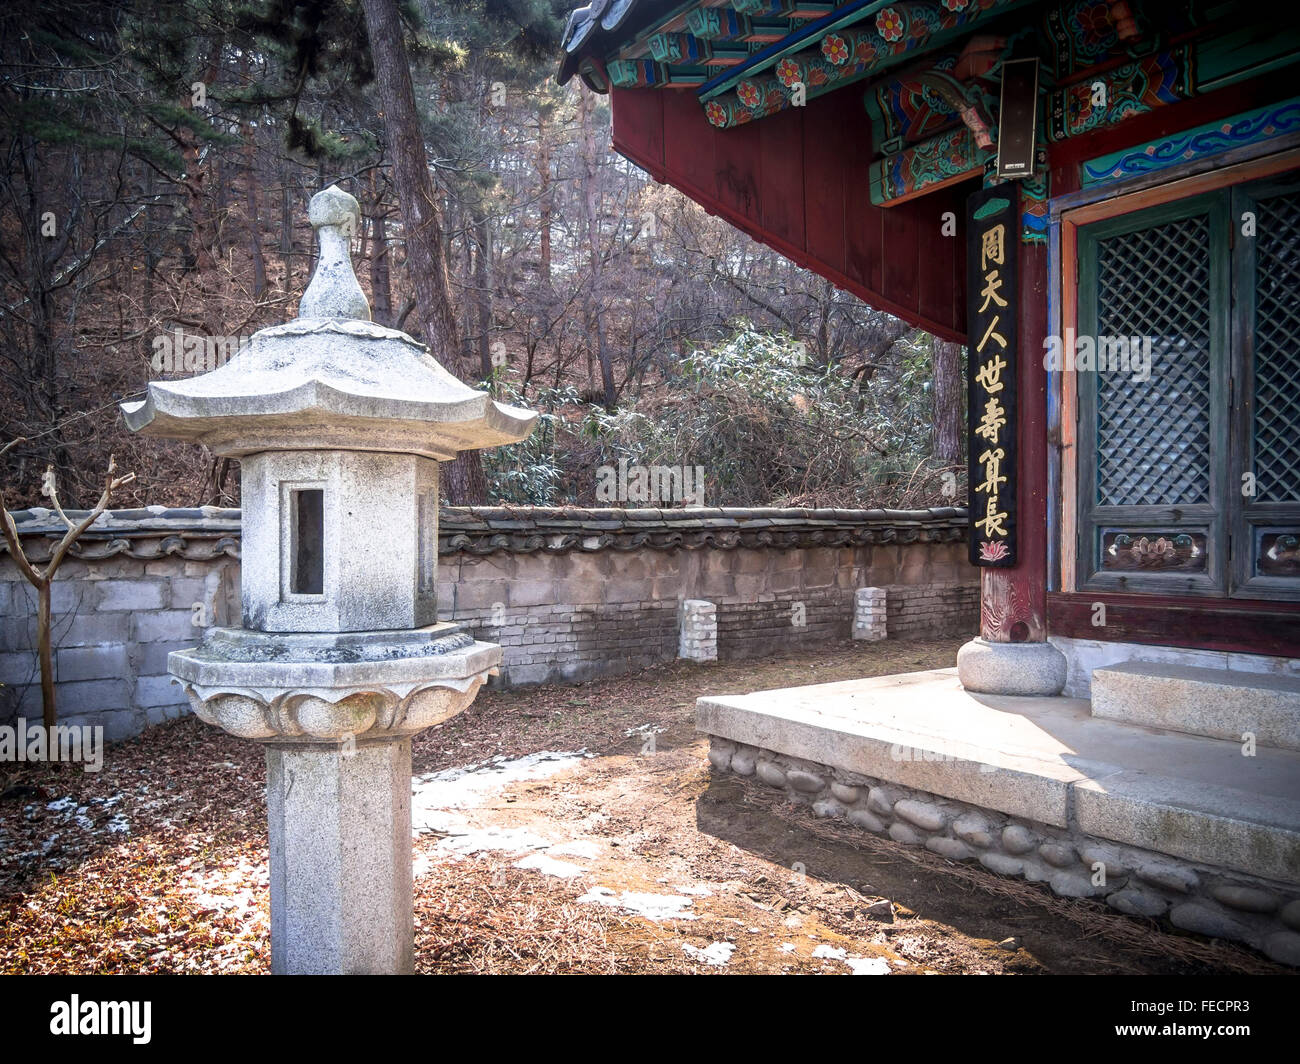 Buddhist temple building and grounds in South Korea. Stock Photo